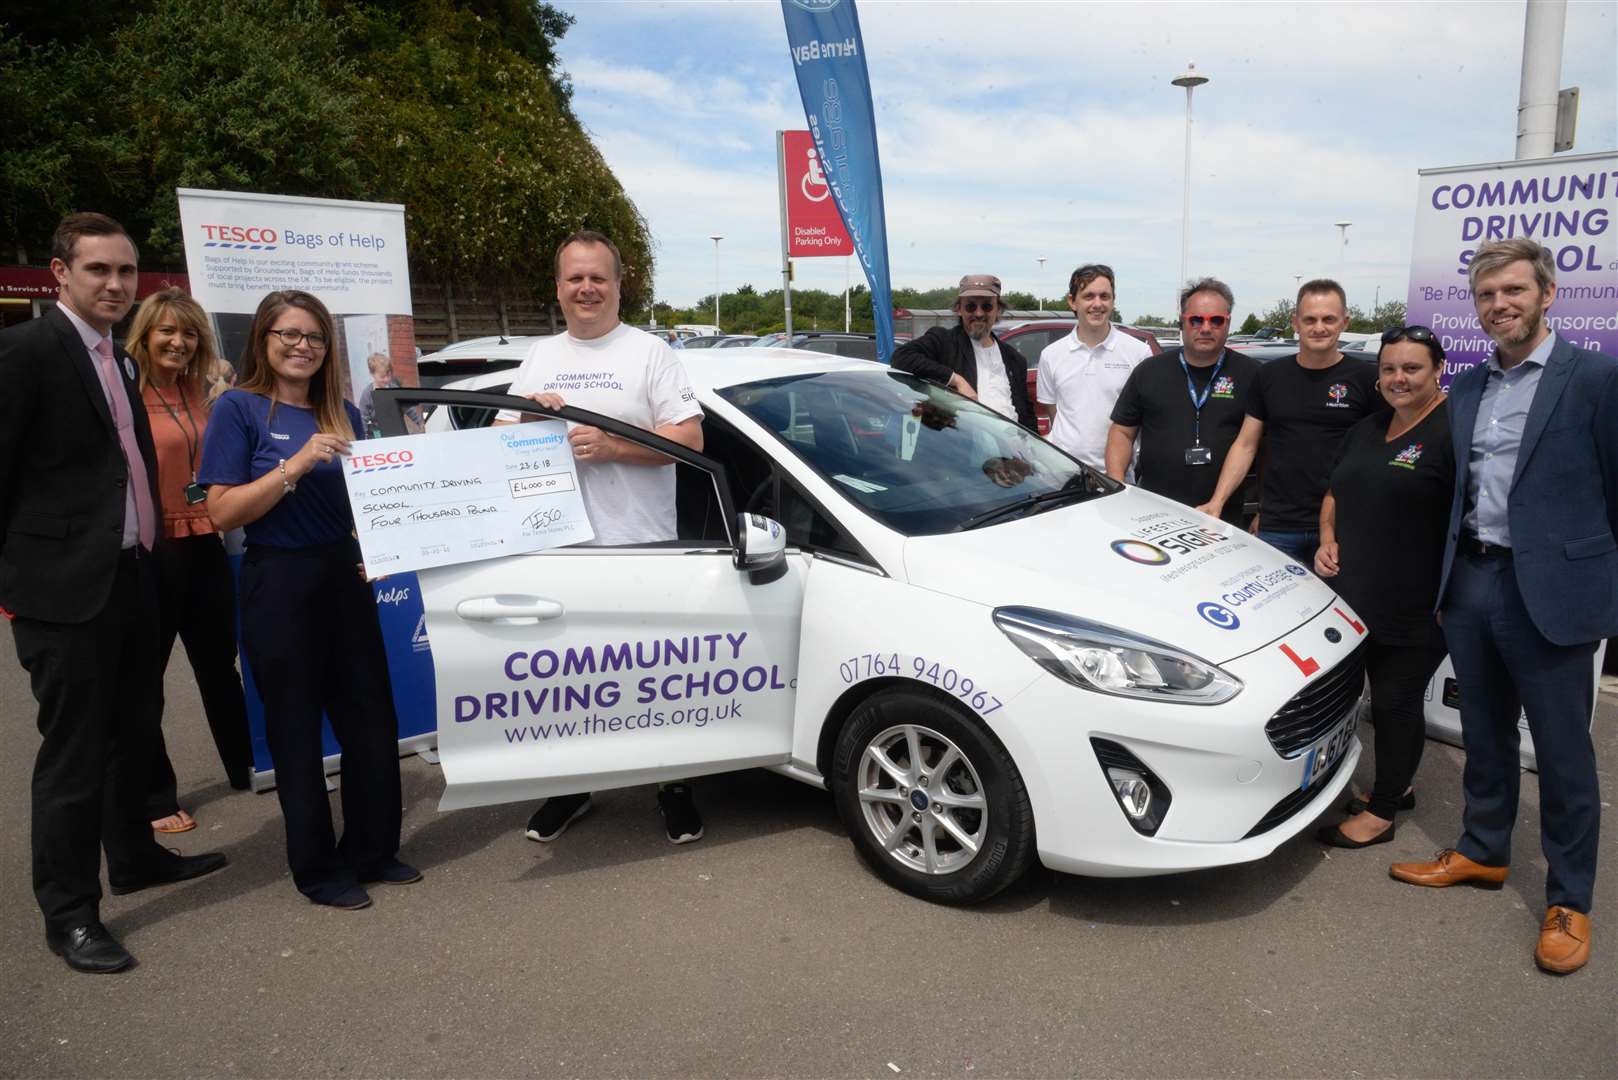 Loisa Dane, Community Champion at Tesco presents John Nicholson with a new car and a cheque for £4000